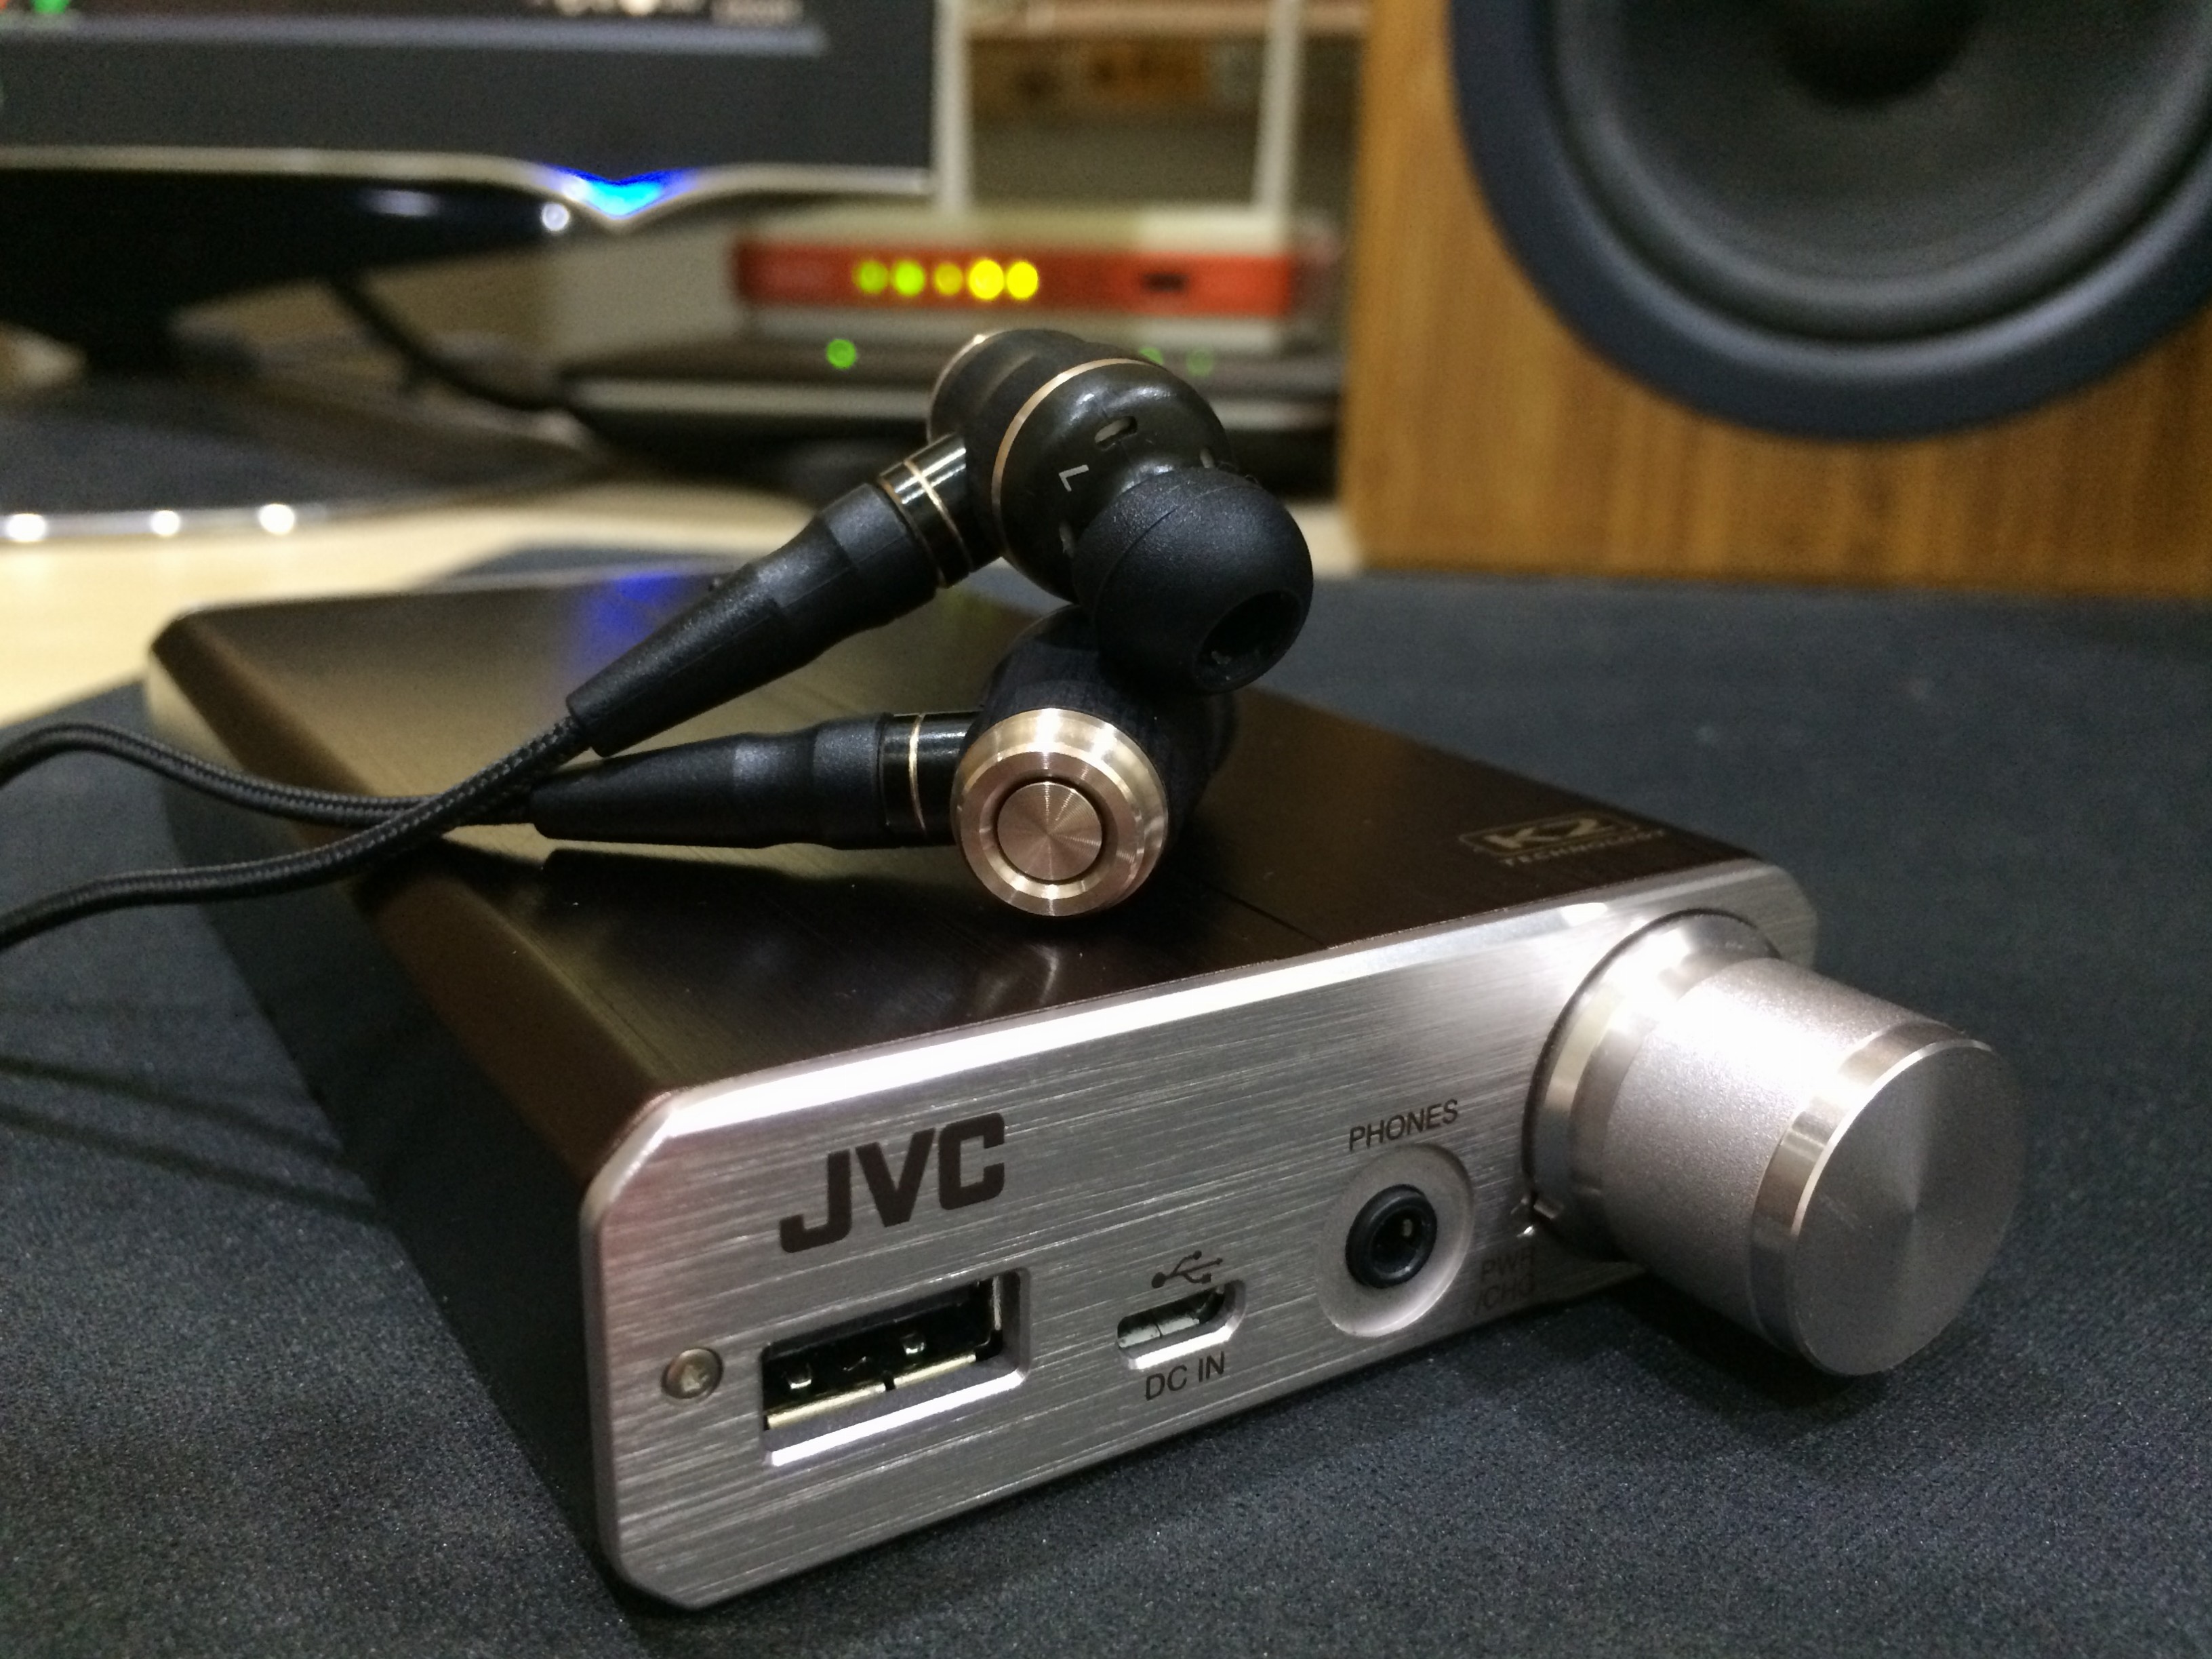 Paired with JVC's own headphone amp, the SU-AX7 show a marked improvement in performance